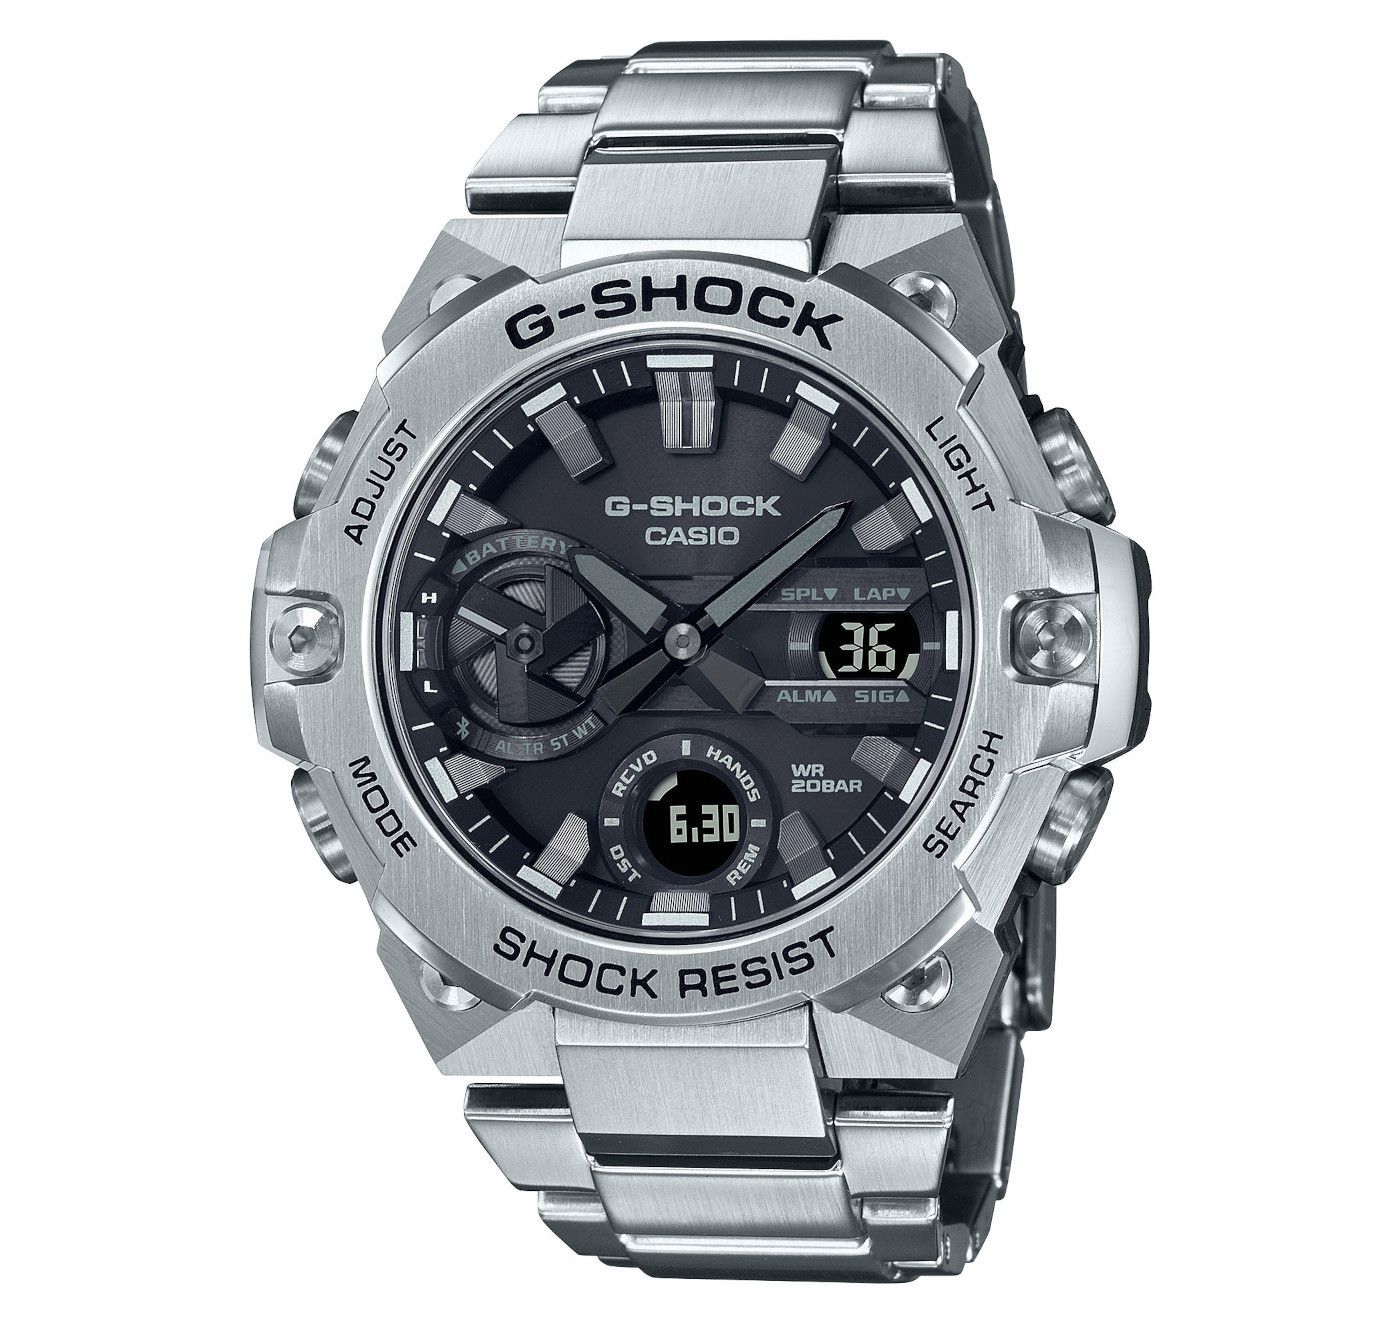 This Casio G-shock Analogue-Digital Watch for Men is the perfect timepiece to wear or to gift. It's Silver 41 mm Round case combined with the comfortable Silver Stainless steel will ensure you enjoy this stunning timepiece without any compromise. Operated by a high quality Quartz movement and water resistant to 20 bars, your watch will keep ticking. This sporty and trendy watch is a perfect gift for New Year, birthday,valentine's day and so on  -The watch has a Calendar function: Day-Date, Bluetooth, Solar Powered, Worldtime, Light High quality 21 cm length and 22 mm width Silver Stainless steel strap with a Fold over with push button clasp Case diameter: 41 mm,case thickness: 13 mm, case colour: Silver and dial colour: Black